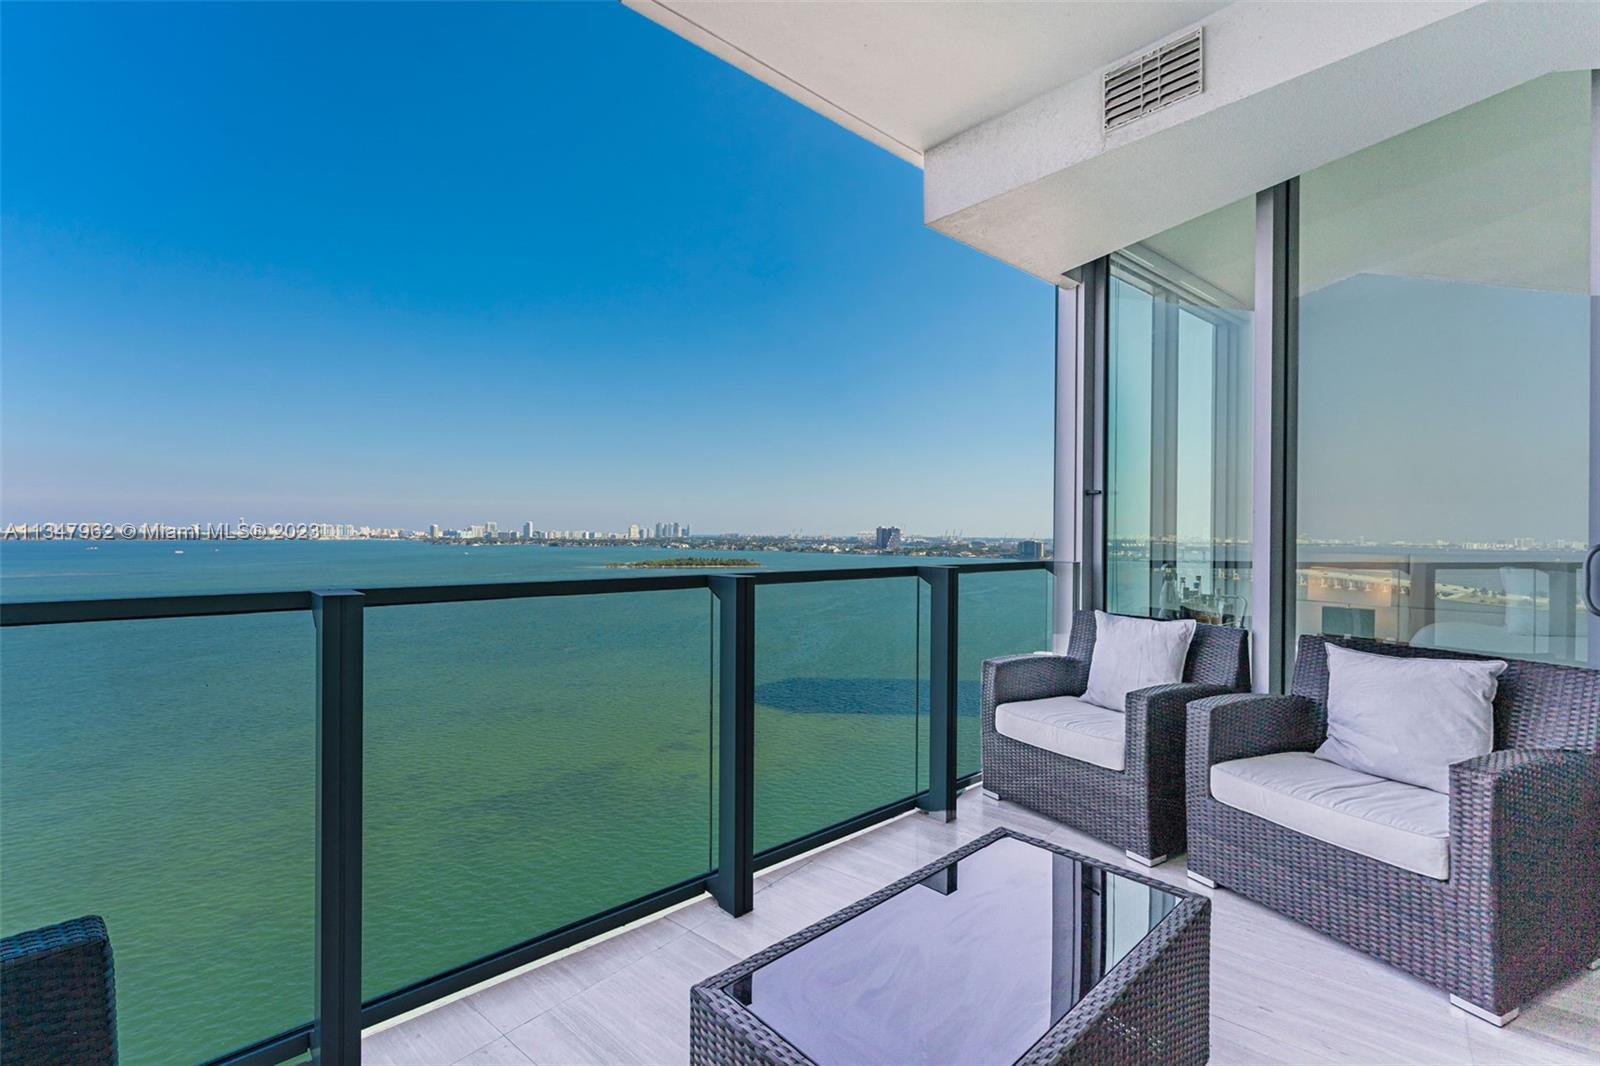 Experience premium living at Biscayne Beach, a contemporary 2-bed, 2-bath condo with panoramic views